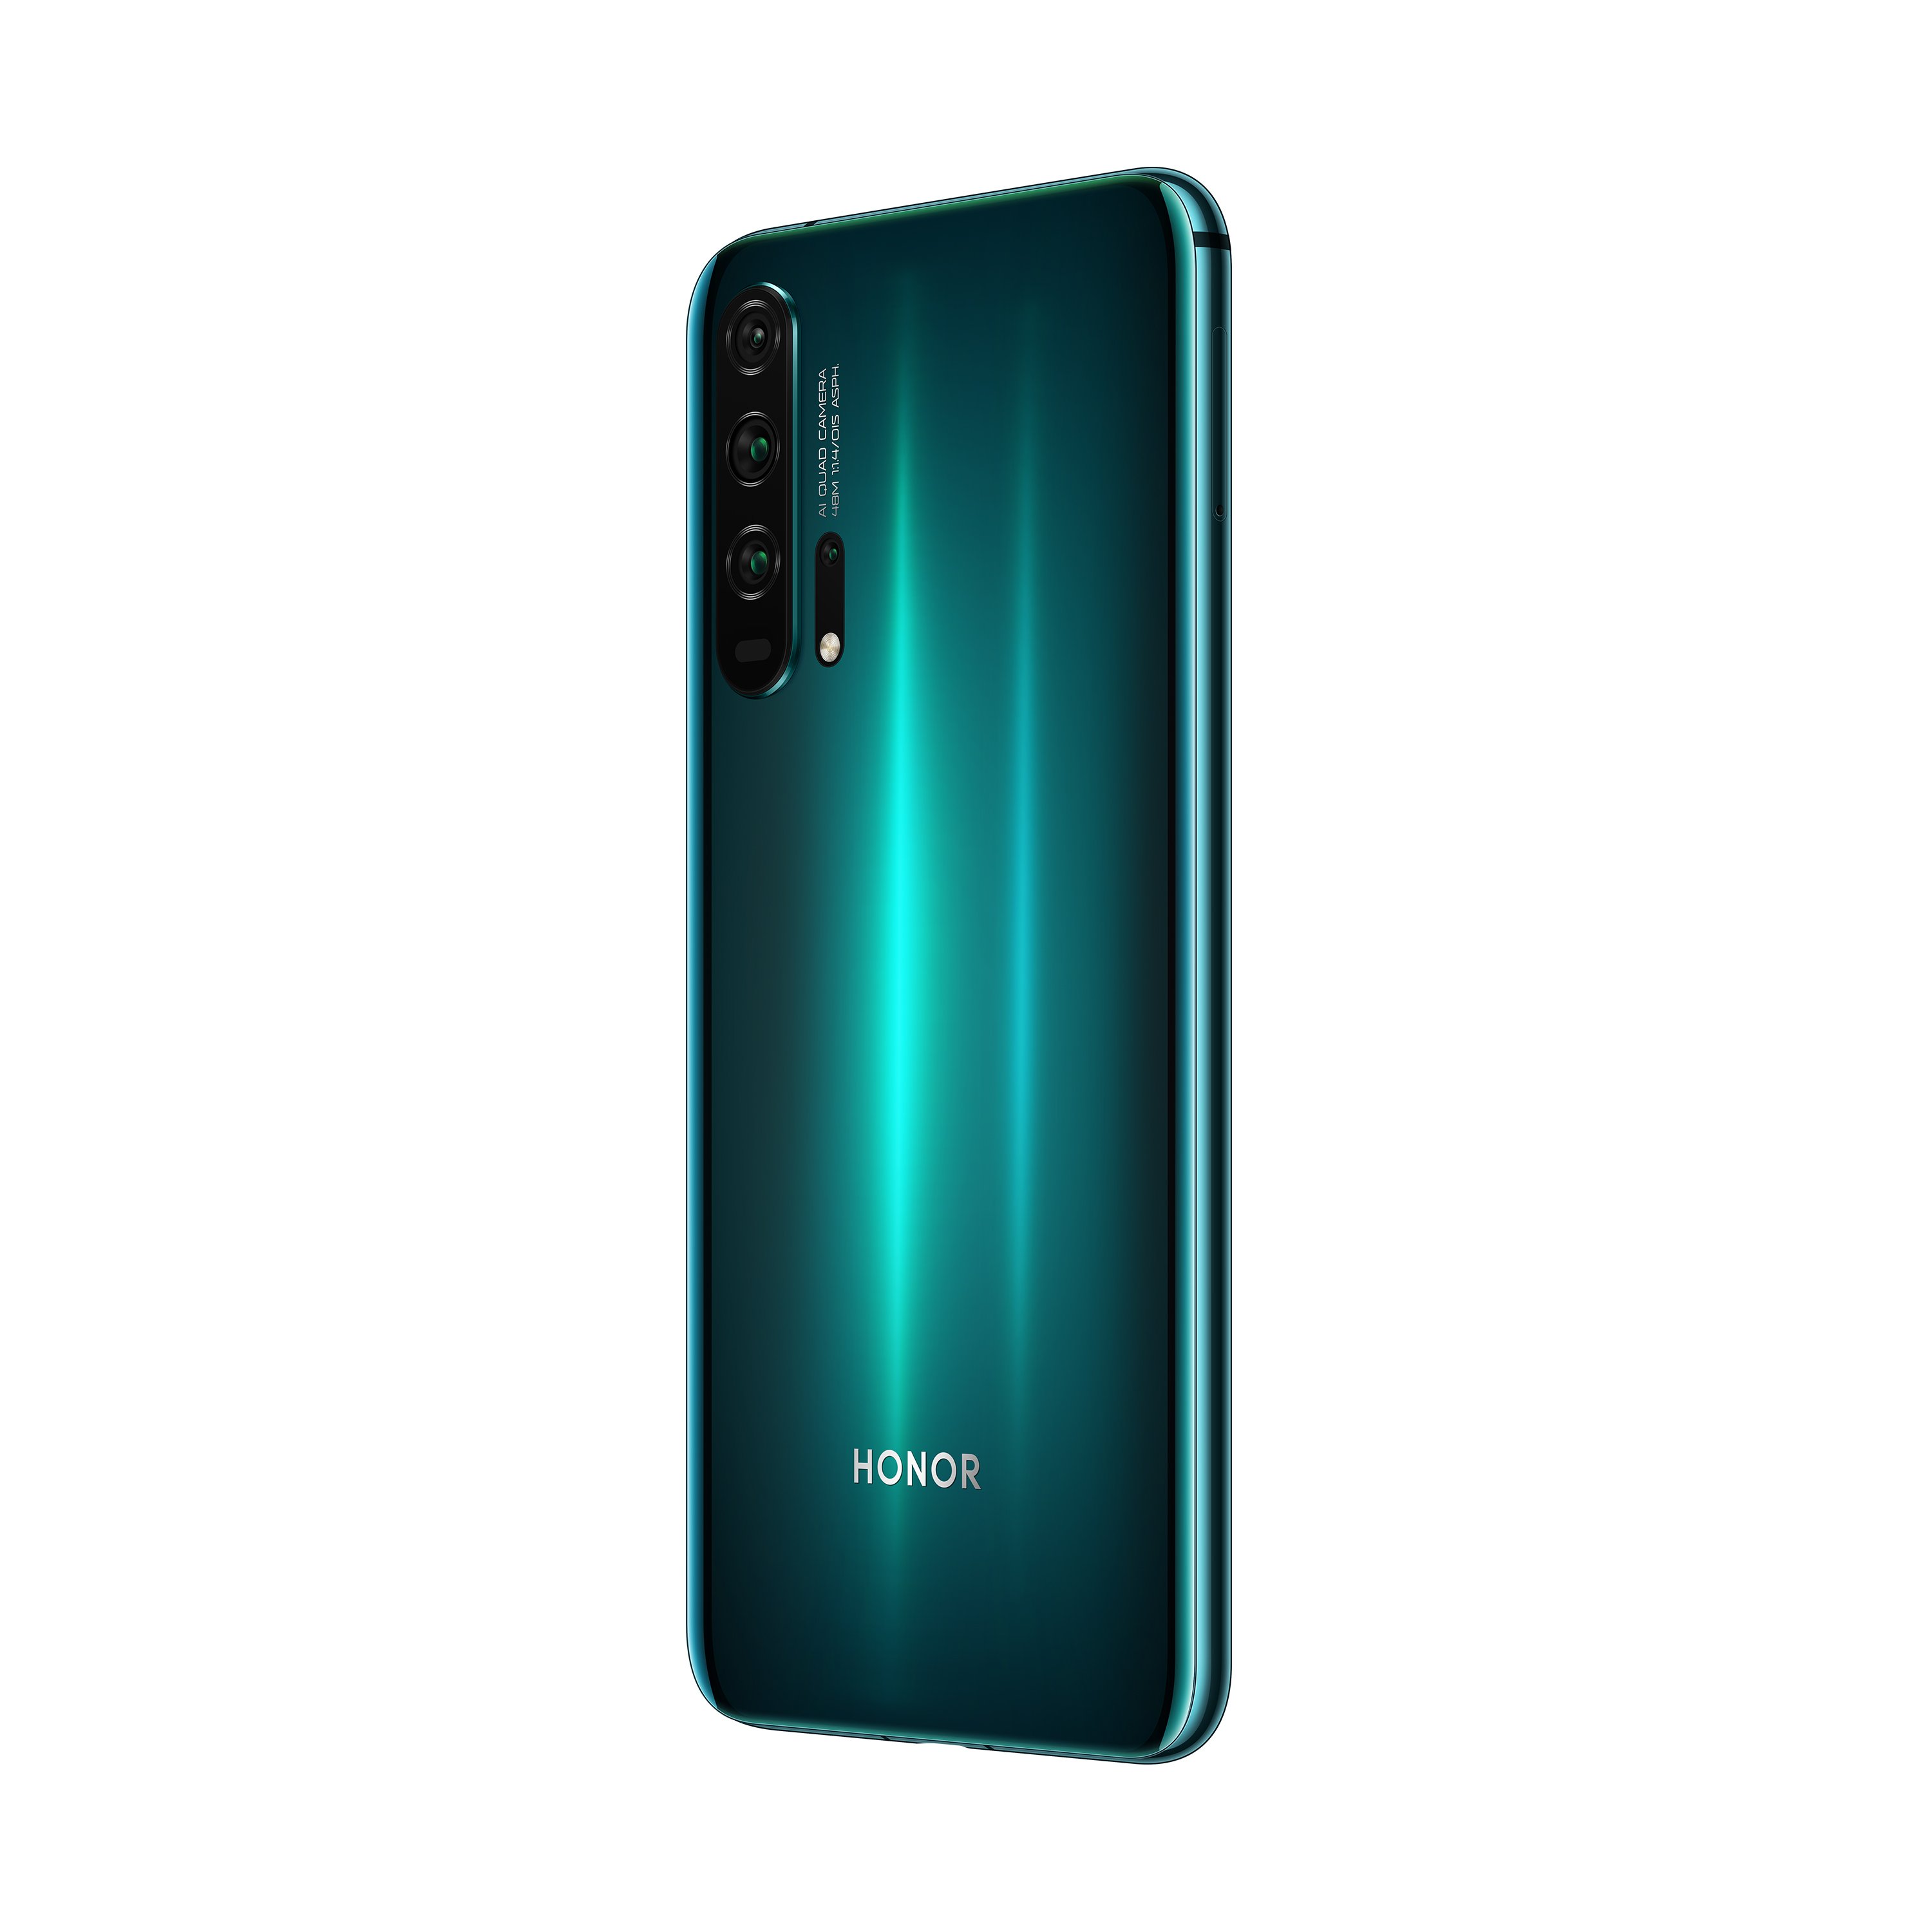 Get Ready For Eid Feast as Honor 20 Pro to Launch in Pakistan